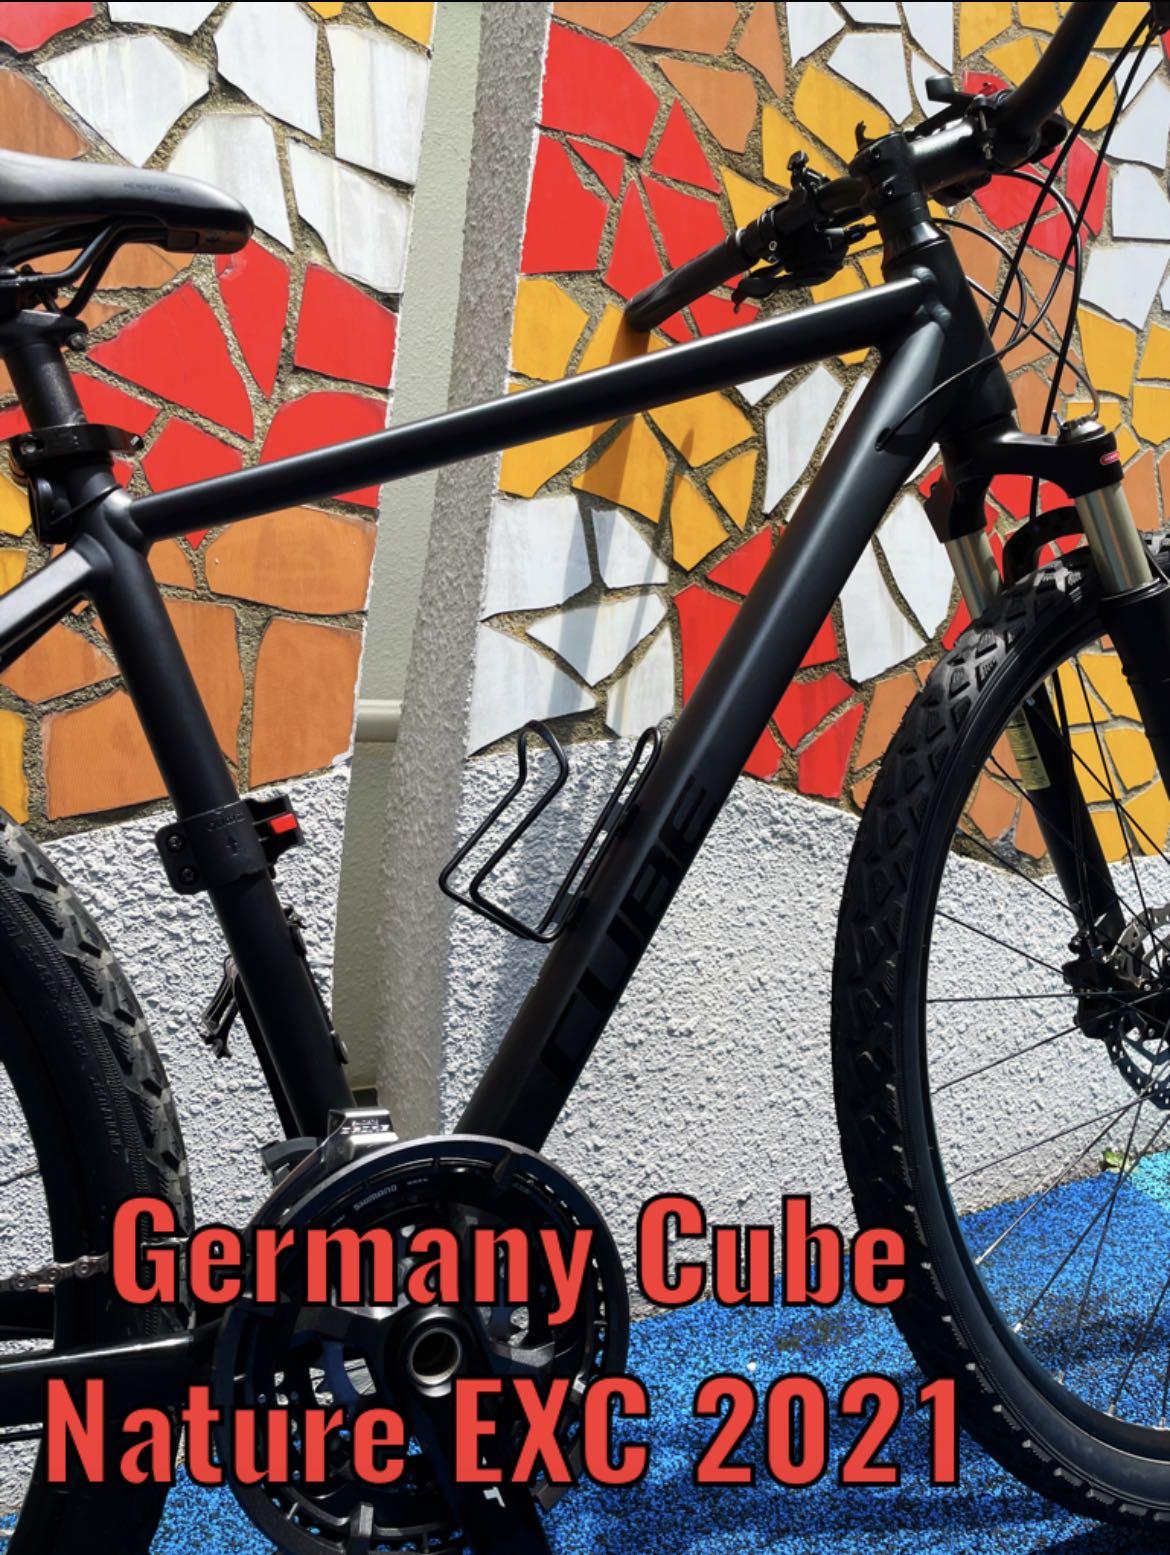 Gøre mit bedste fyrværkeri modstand Germany Cube Nature EXC 2021 hybrid 1 bike bicycle high end XT Shimano,  Sports Equipment, Bicycles & Parts, Bicycles on Carousell